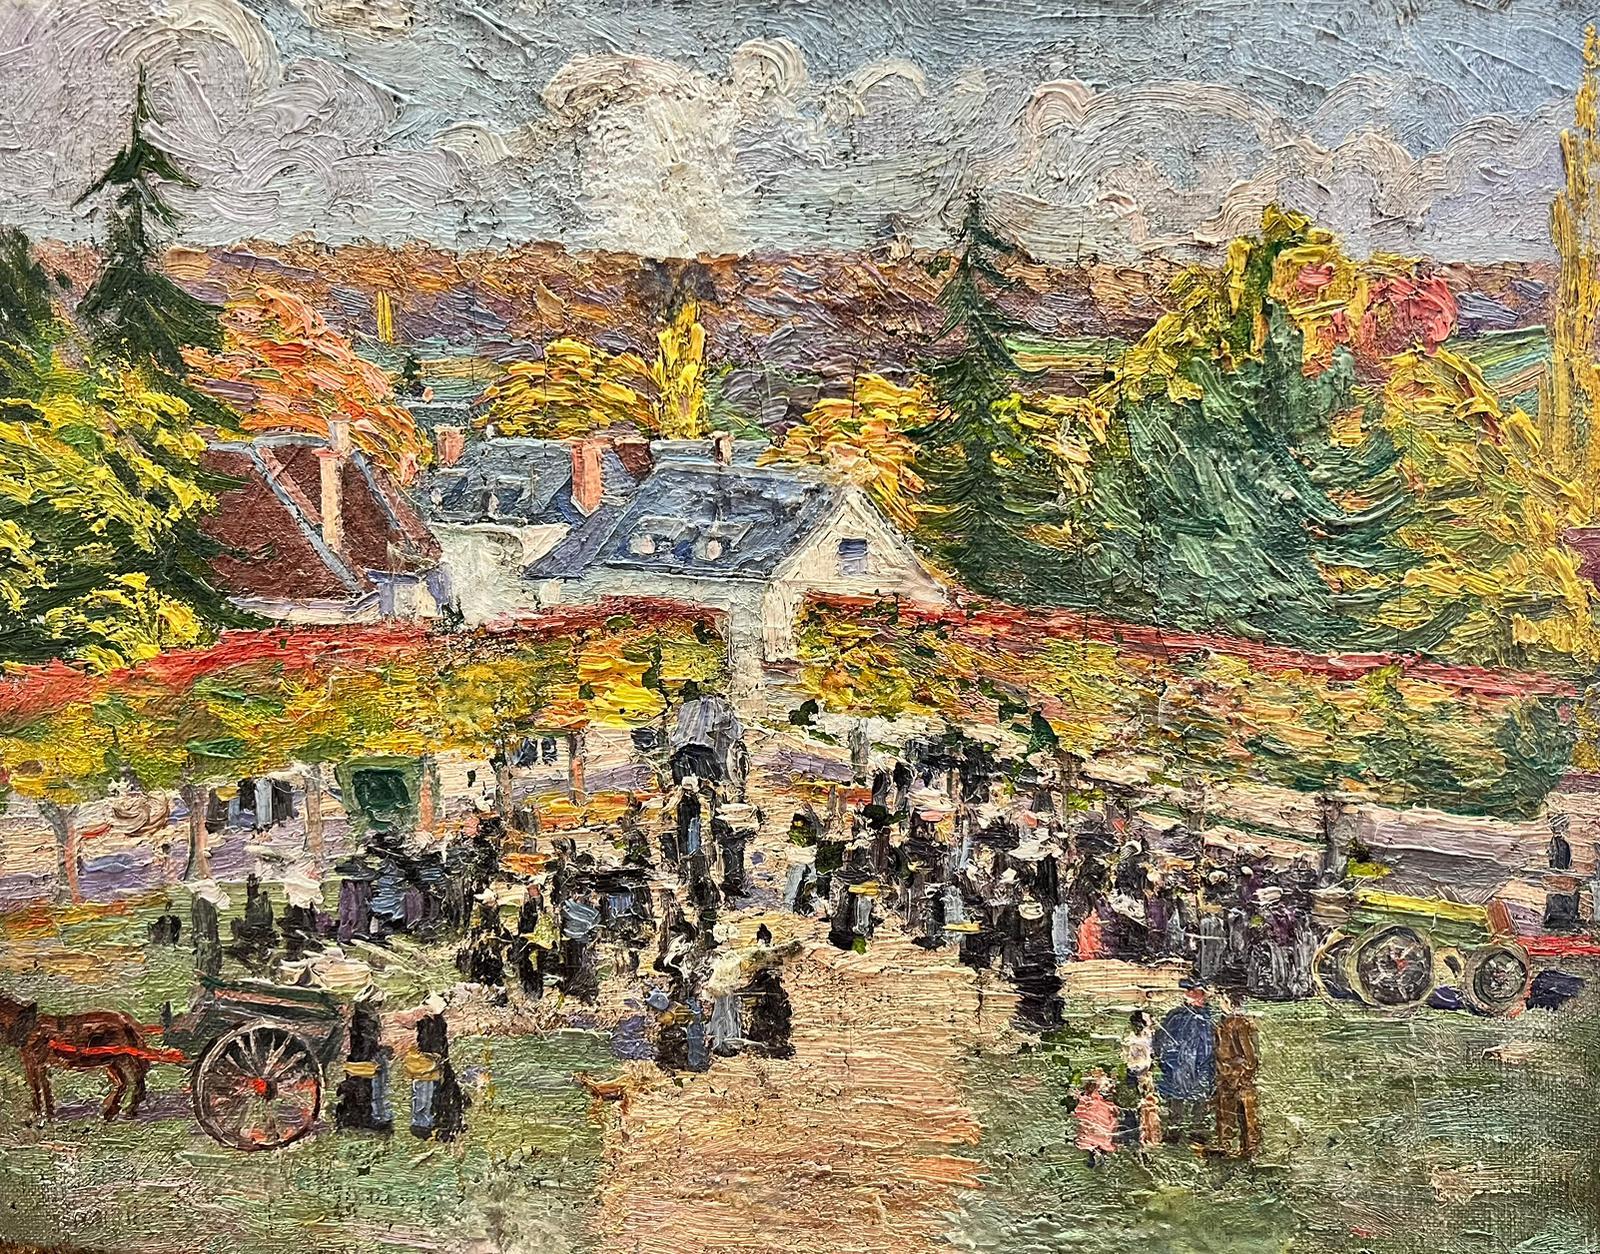 Suzanne Crochet Landscape Painting - Village Fete Market Gathering 1930's French Post Impressionist Oil Painting